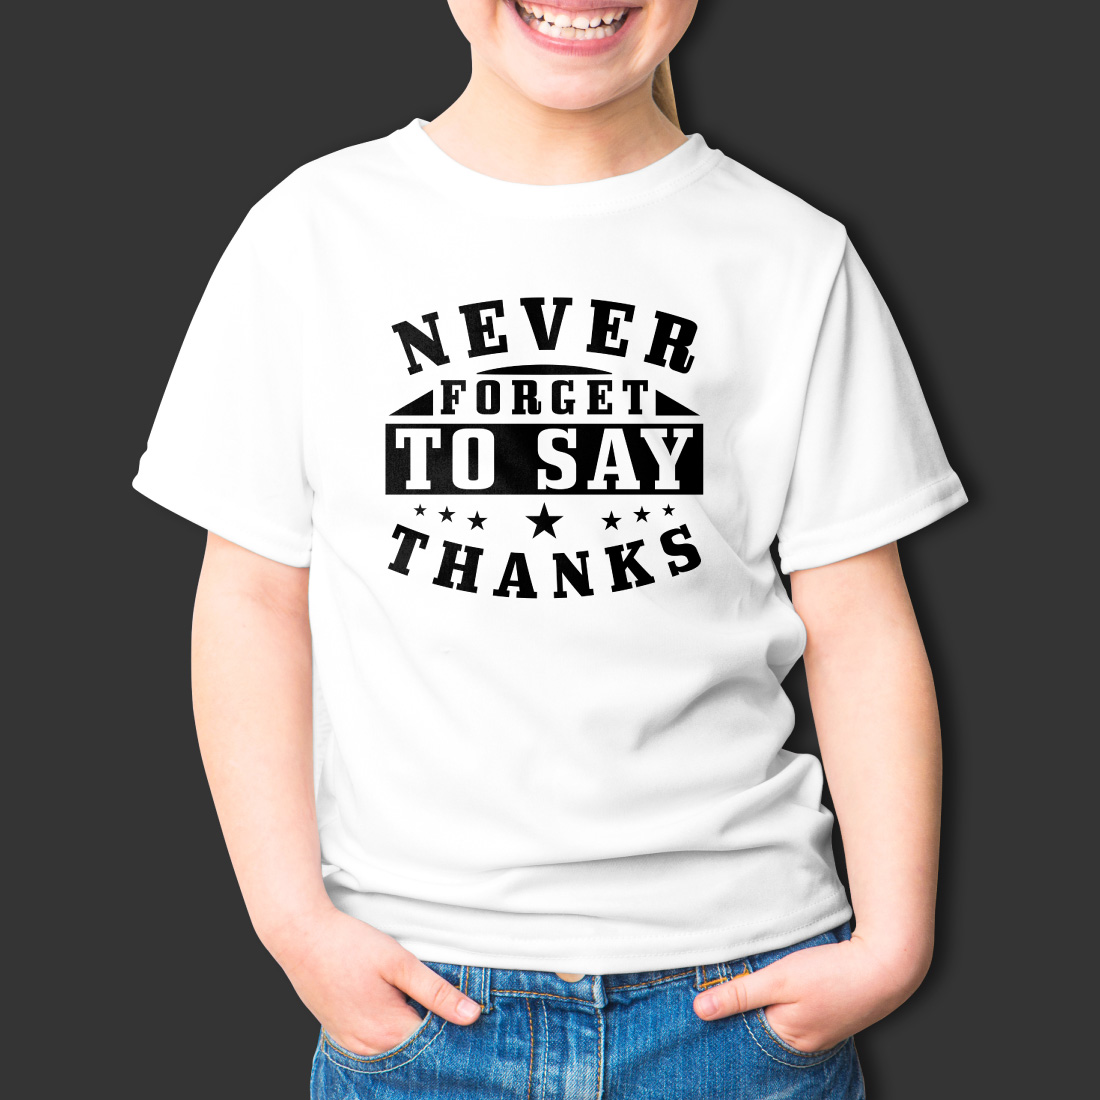 Never forget to say thanks tshirt design cover image.